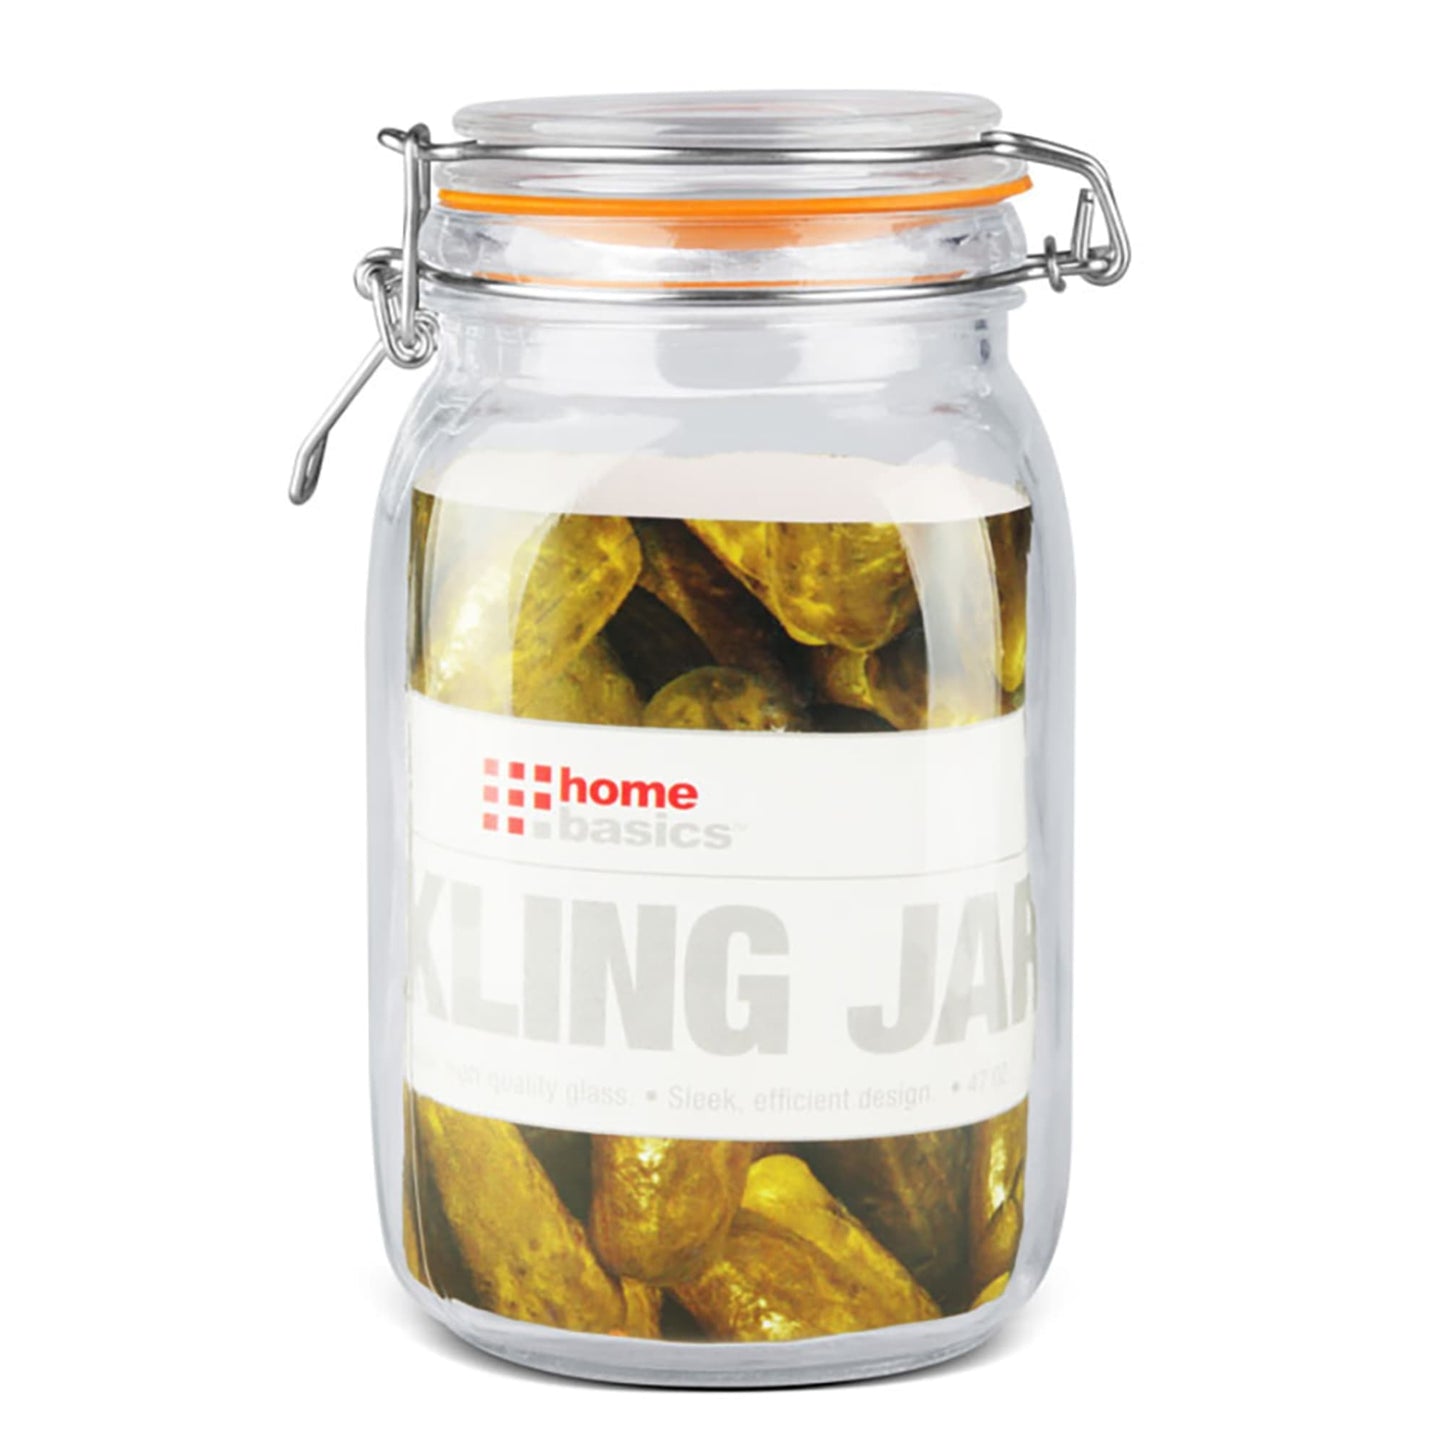 47 oz. Glass Pickling Jar with Wire Bail Lid and Rubber Seal Gasket